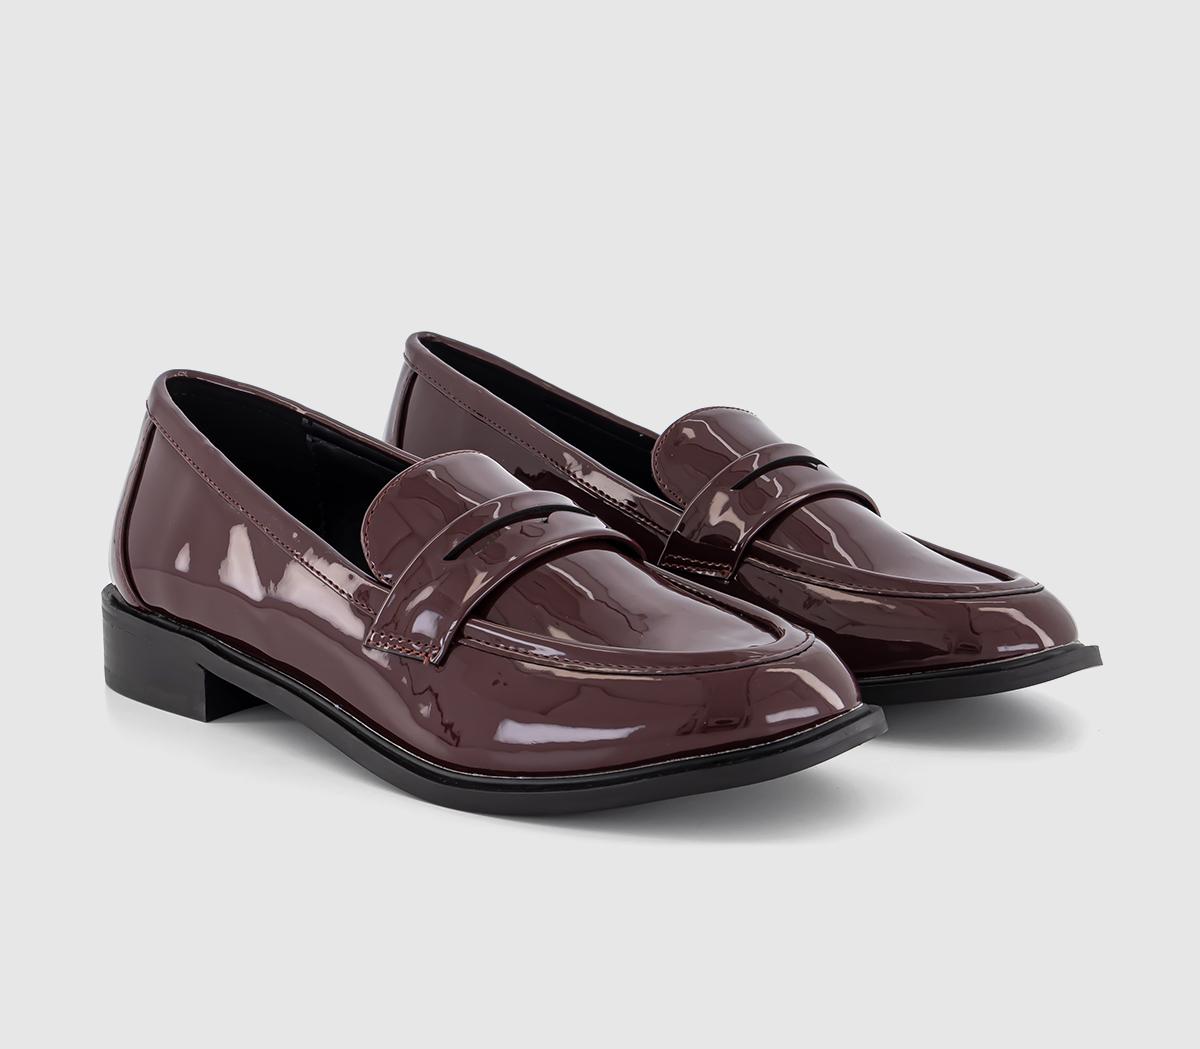 OFFICE Flaming Penny Loafers Burgundy Patent, 7